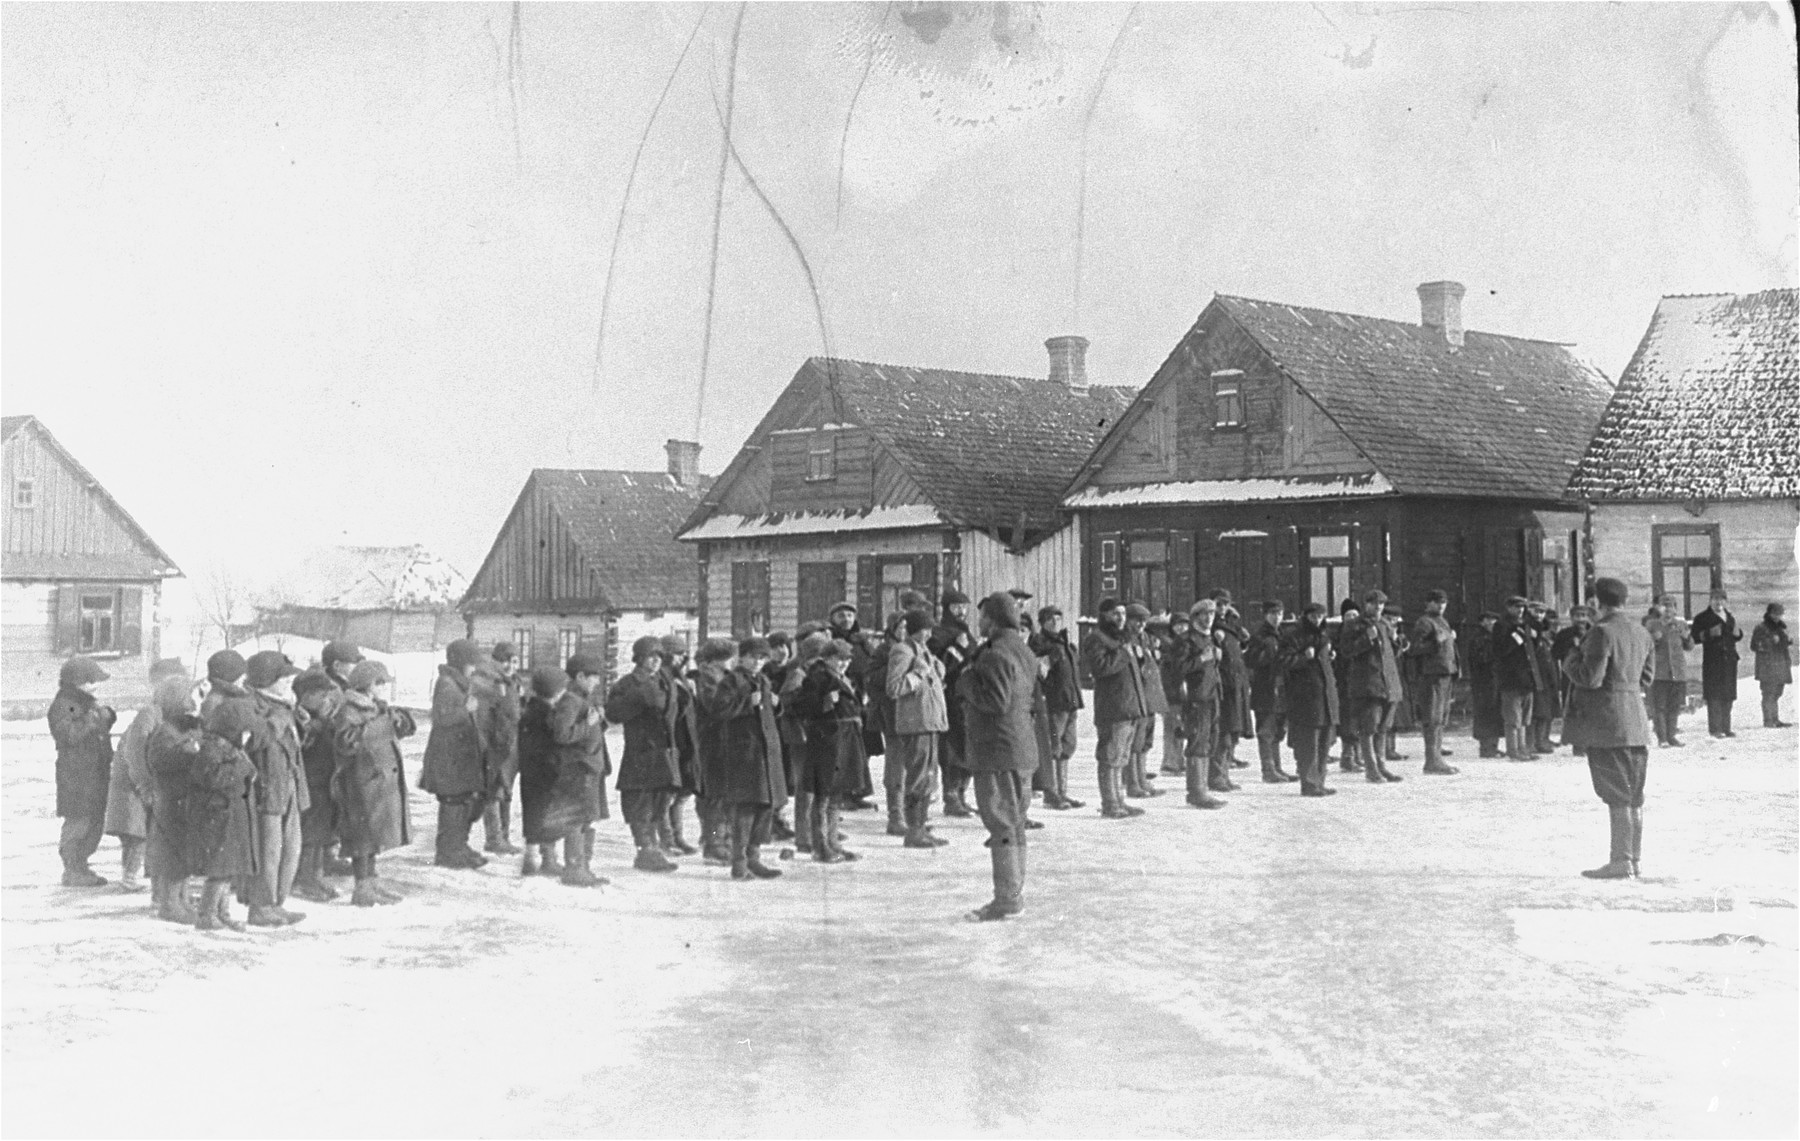 Jewish men who are lined up in an open area of the Wisznice ghetto, are forced to perform exercises.